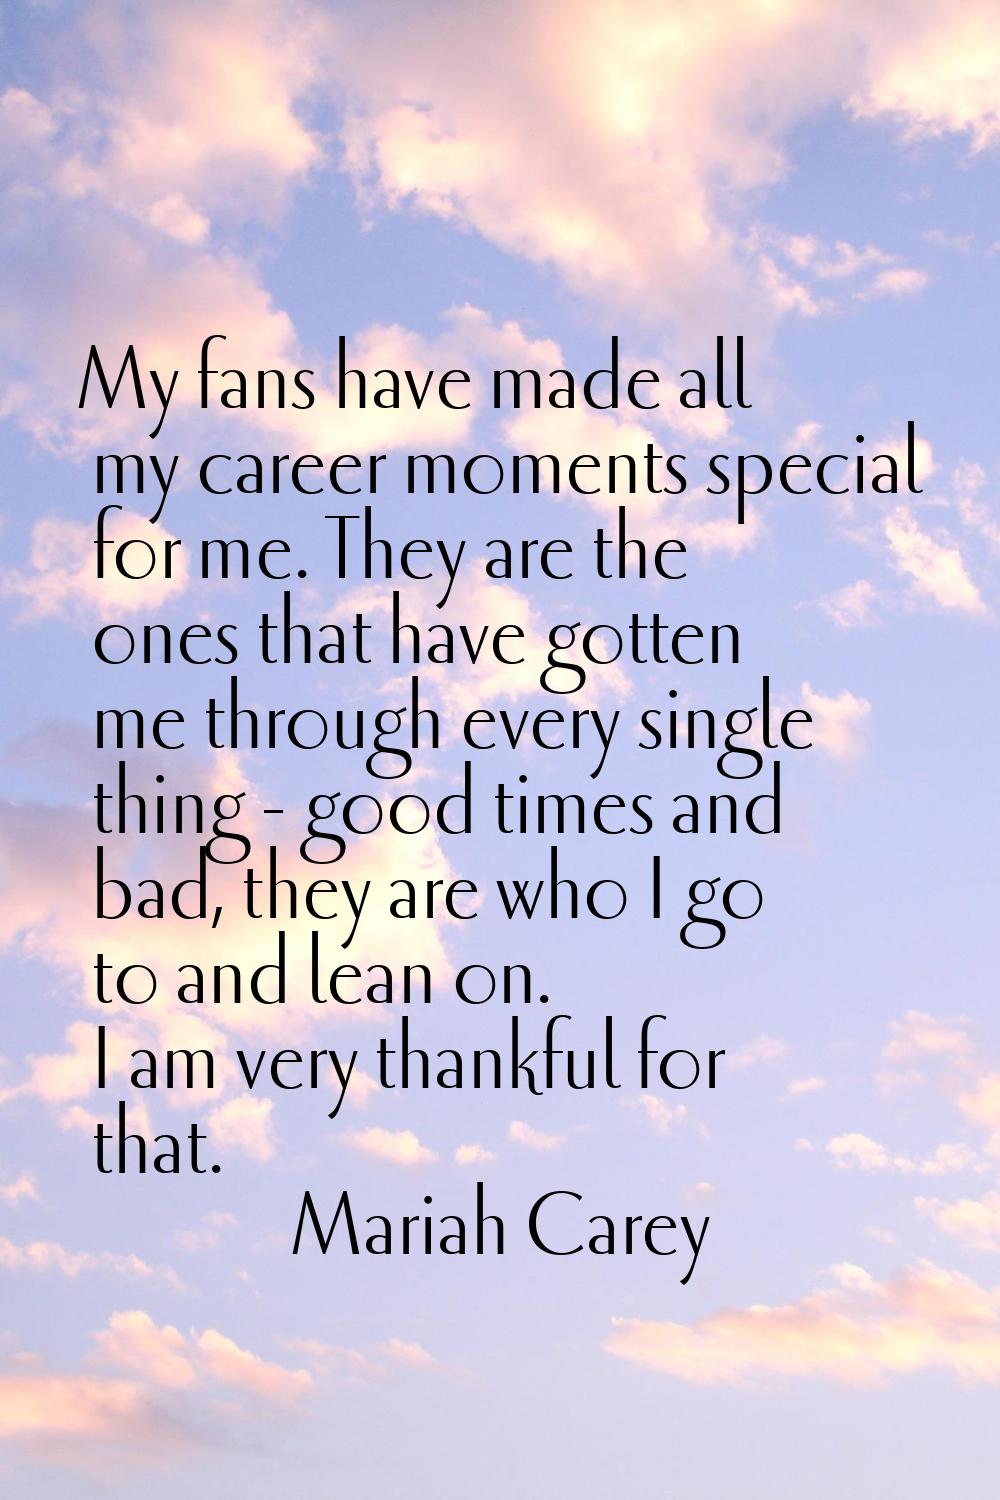 My fans have made all my career moments special for me. They are the ones that have gotten me throu